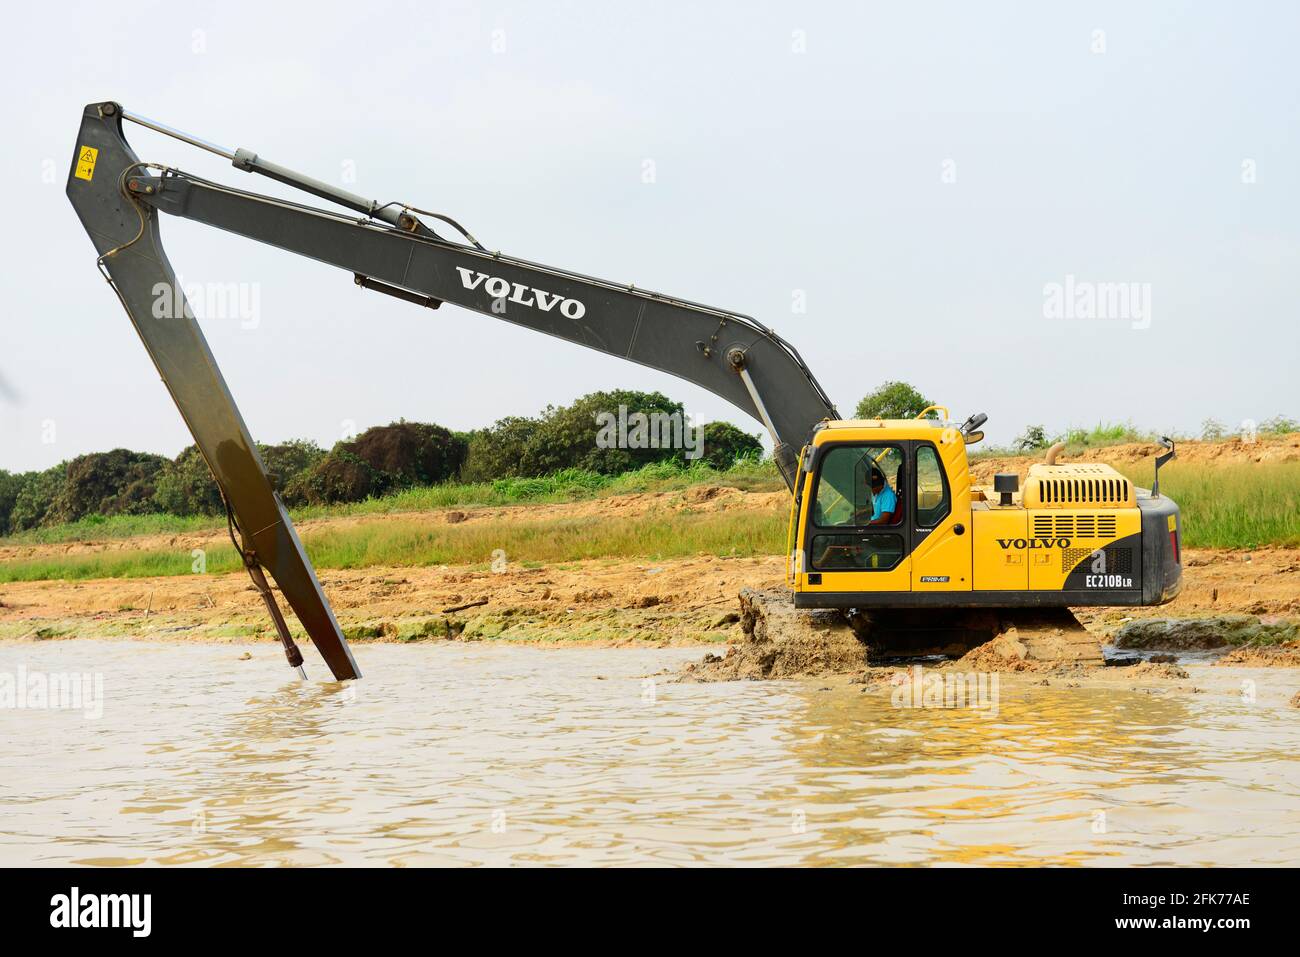 A Volvo Excavator taking out muddy earth from the shore of Tonle Sap lake in Cambodia. Stock Photo